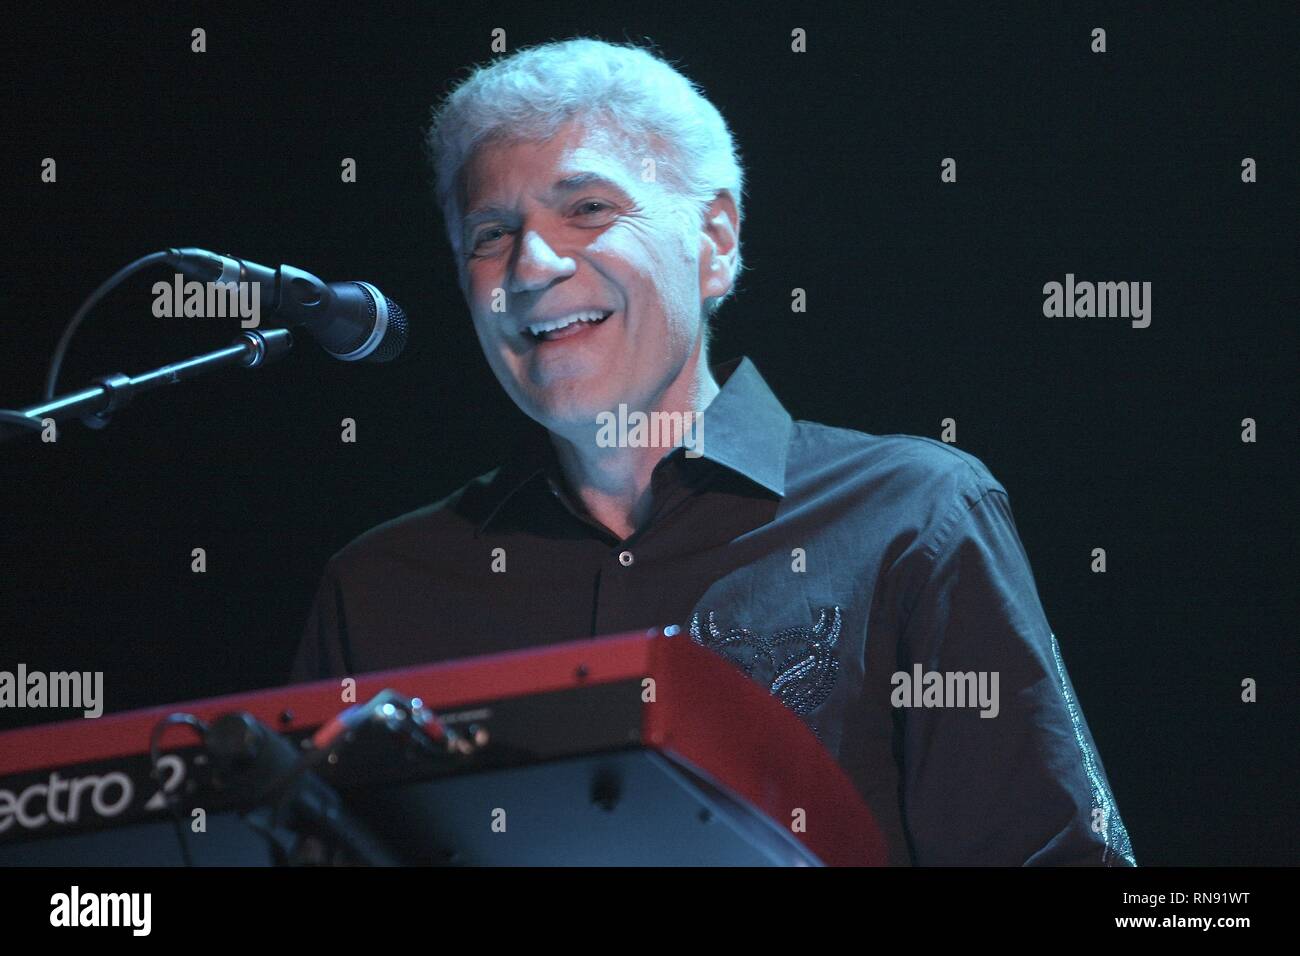 Former vocalist and keyboardist of Styx, Dennis DeYoung is shown performing on stage with his solo band during a 'live' concert appearance. Stock Photo